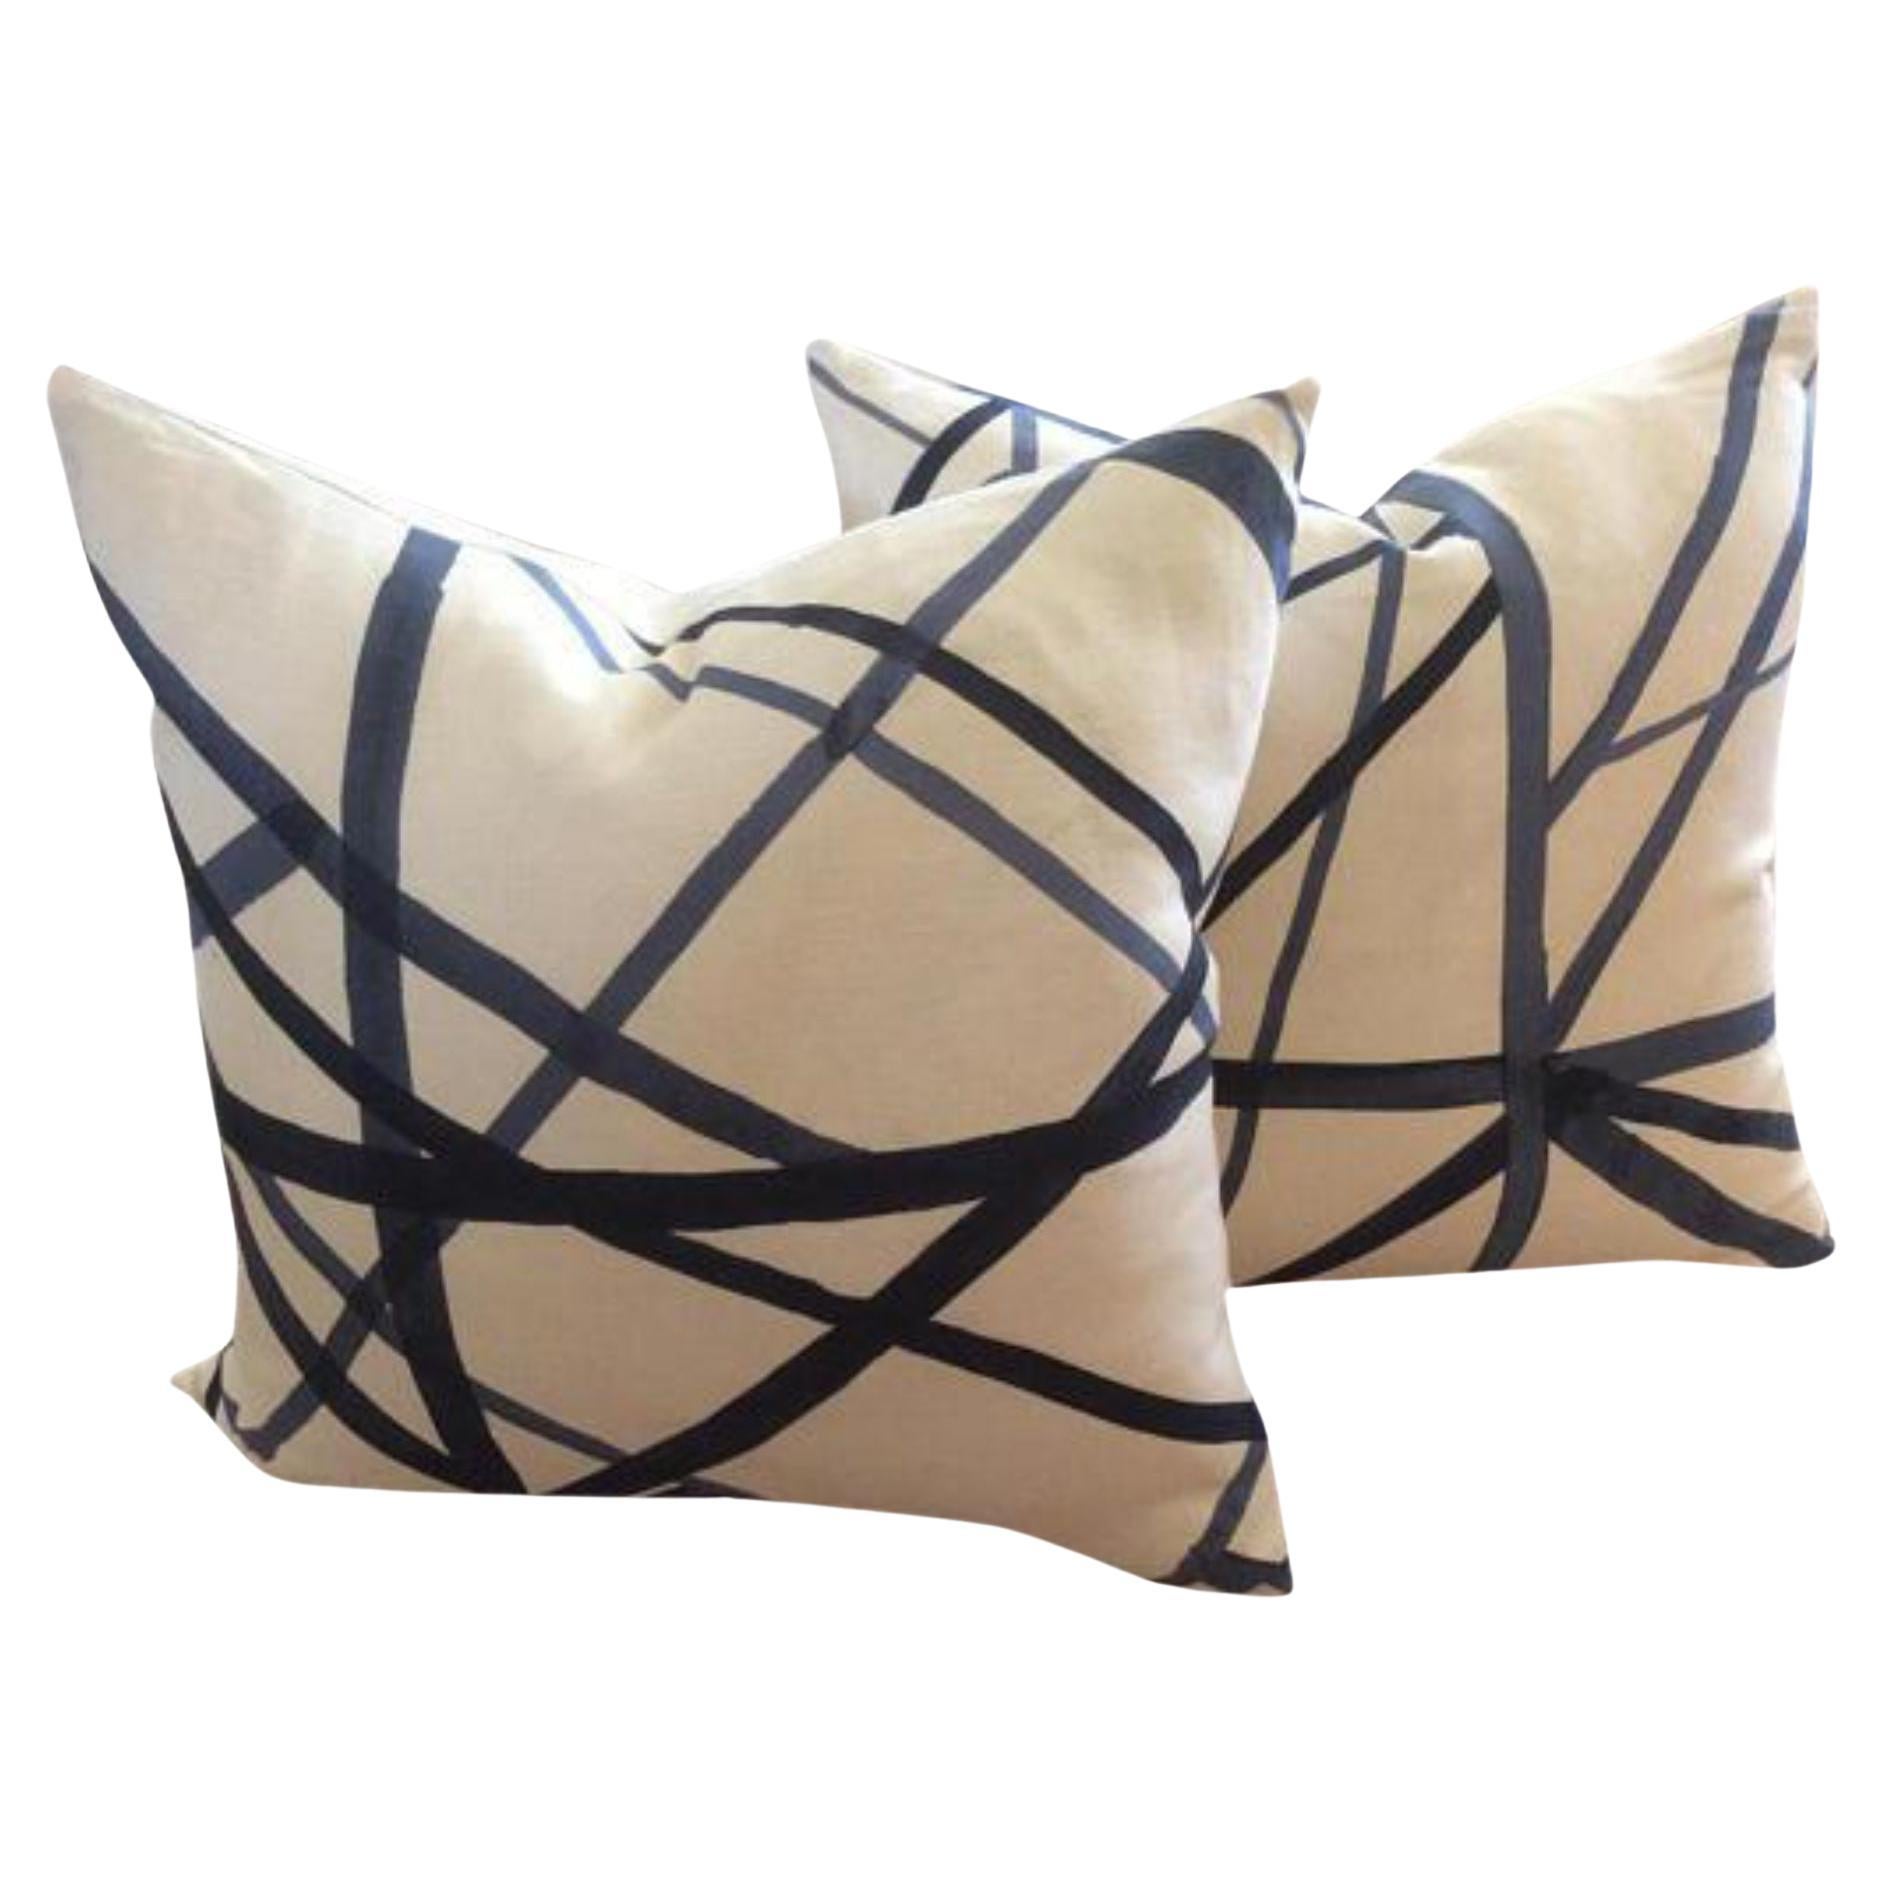 Contemporary "Channels" Pillows for Lee Jofa Groundworks in Blue - a Pair For Sale